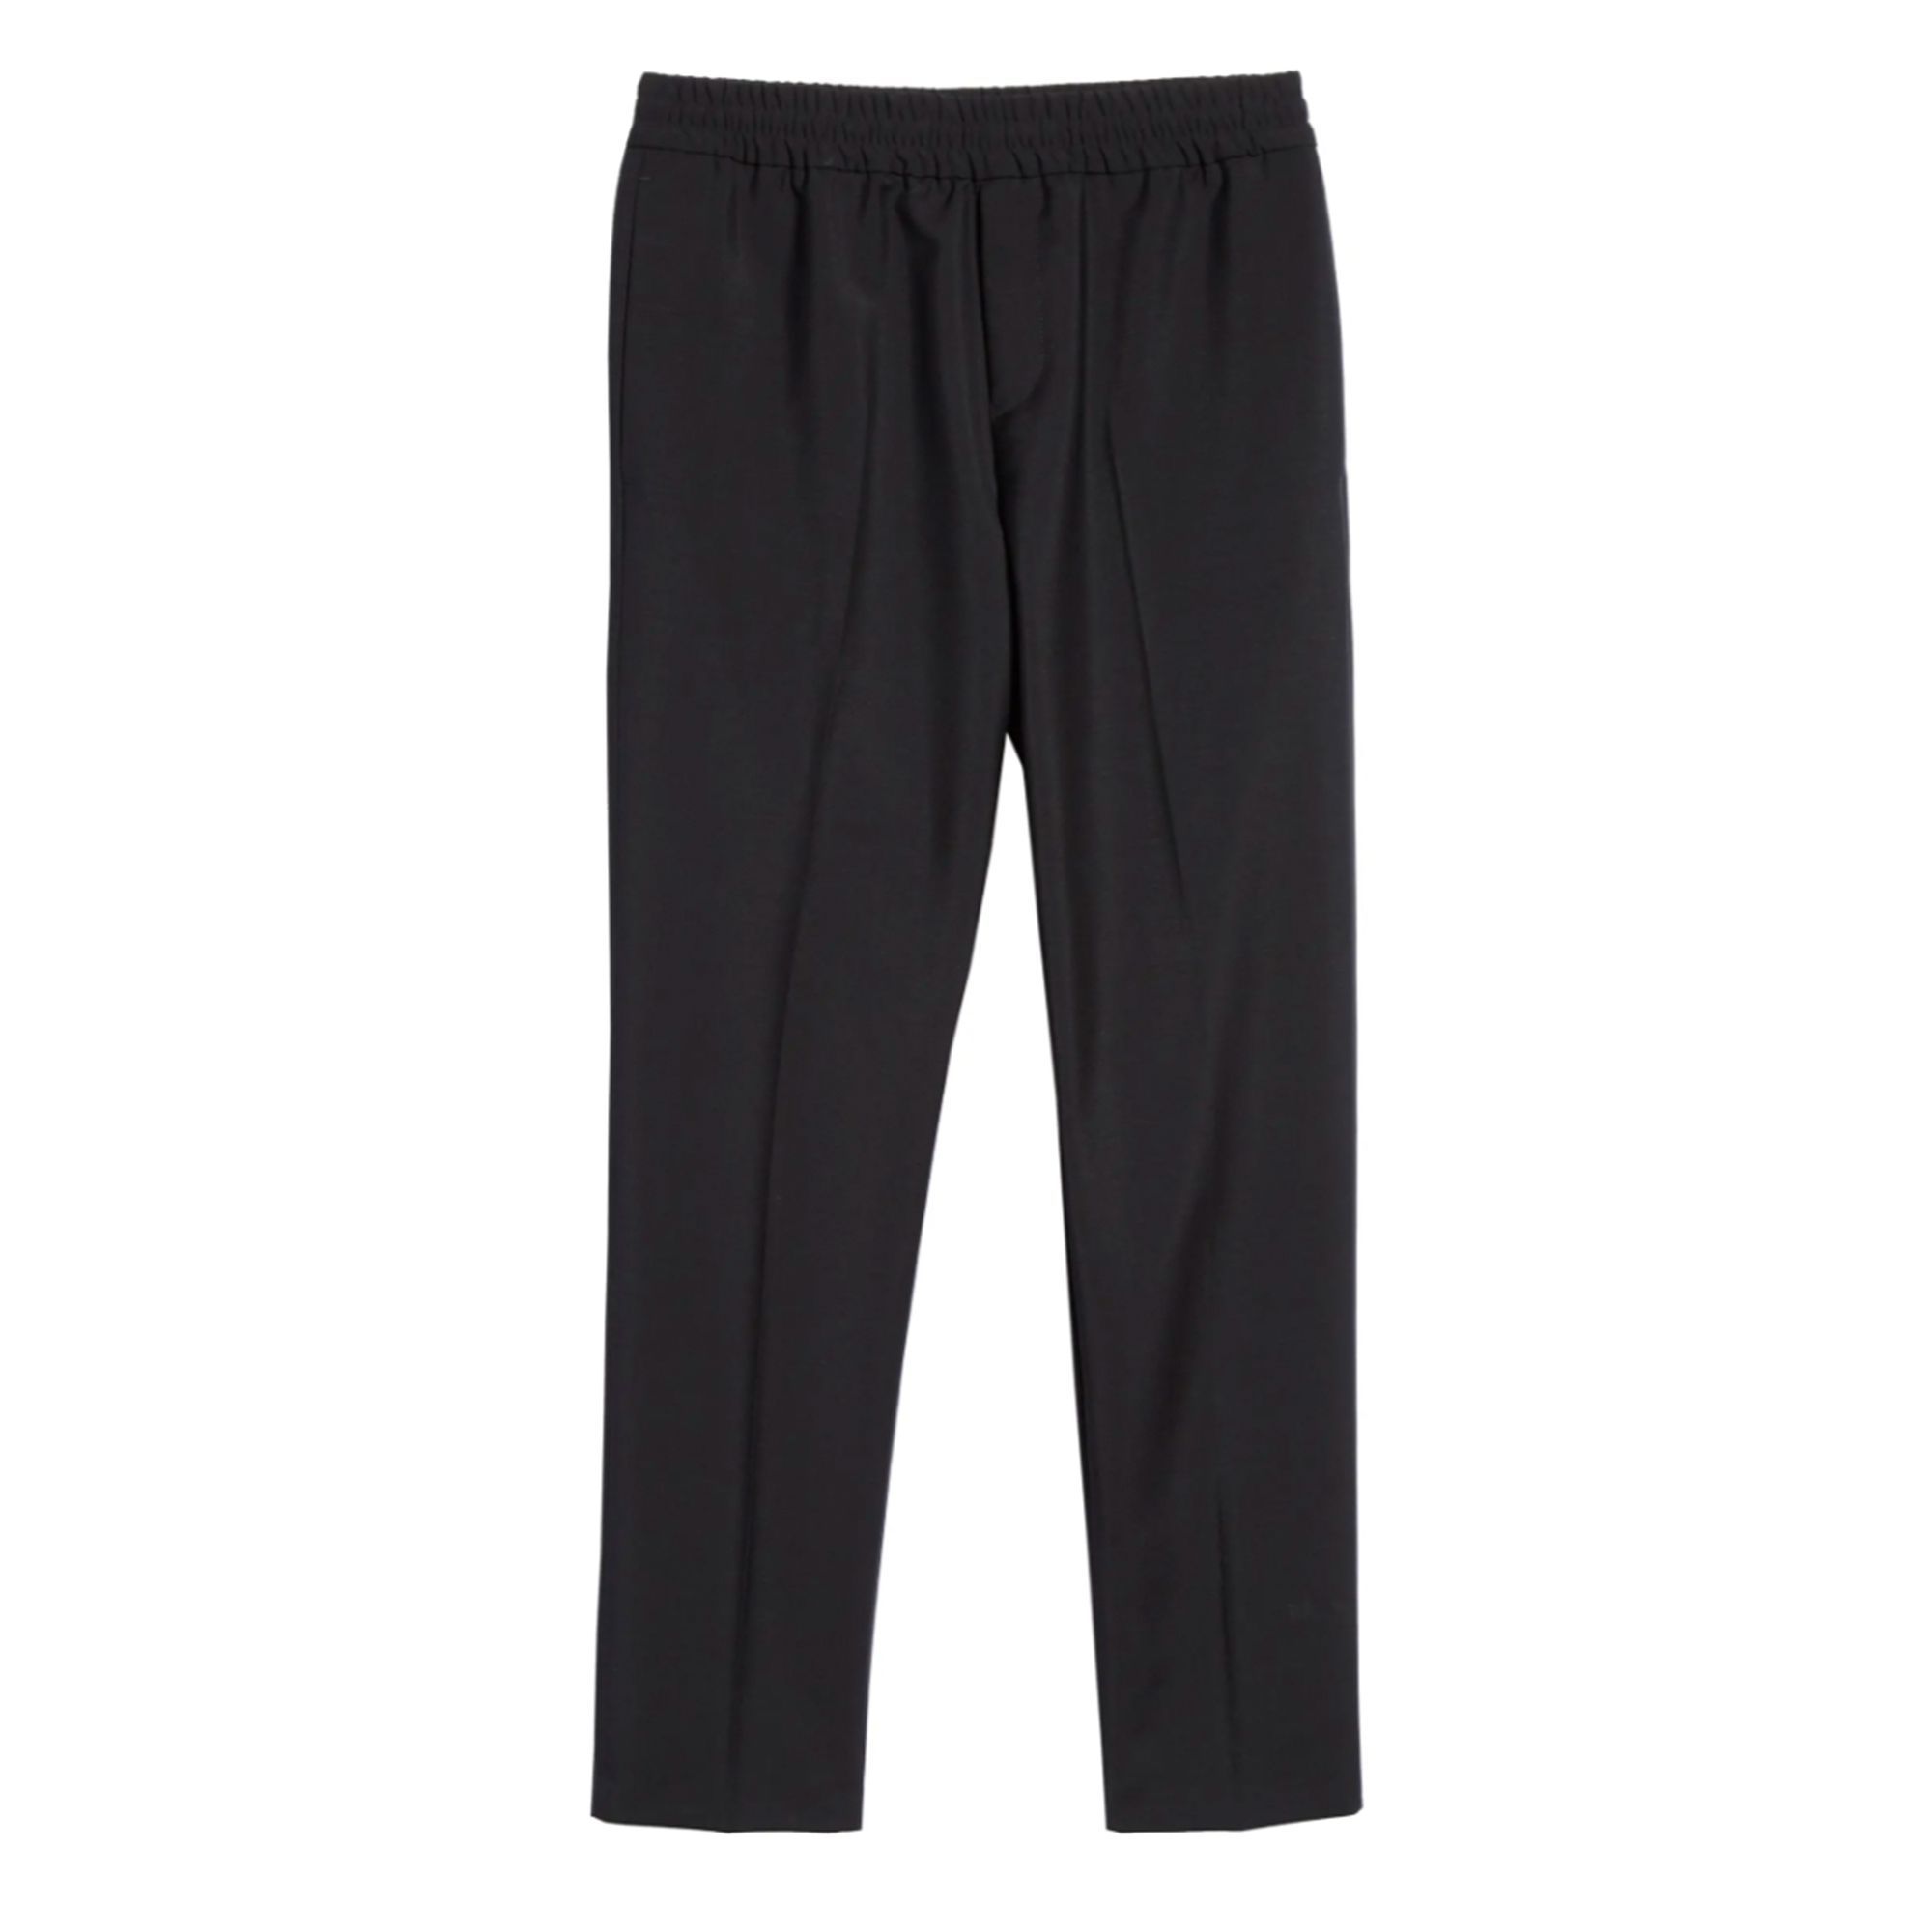 CHRISTOPHE LEMAIRE One-pleated Pants Black Washed Cotton Virgin Wool Trousers 